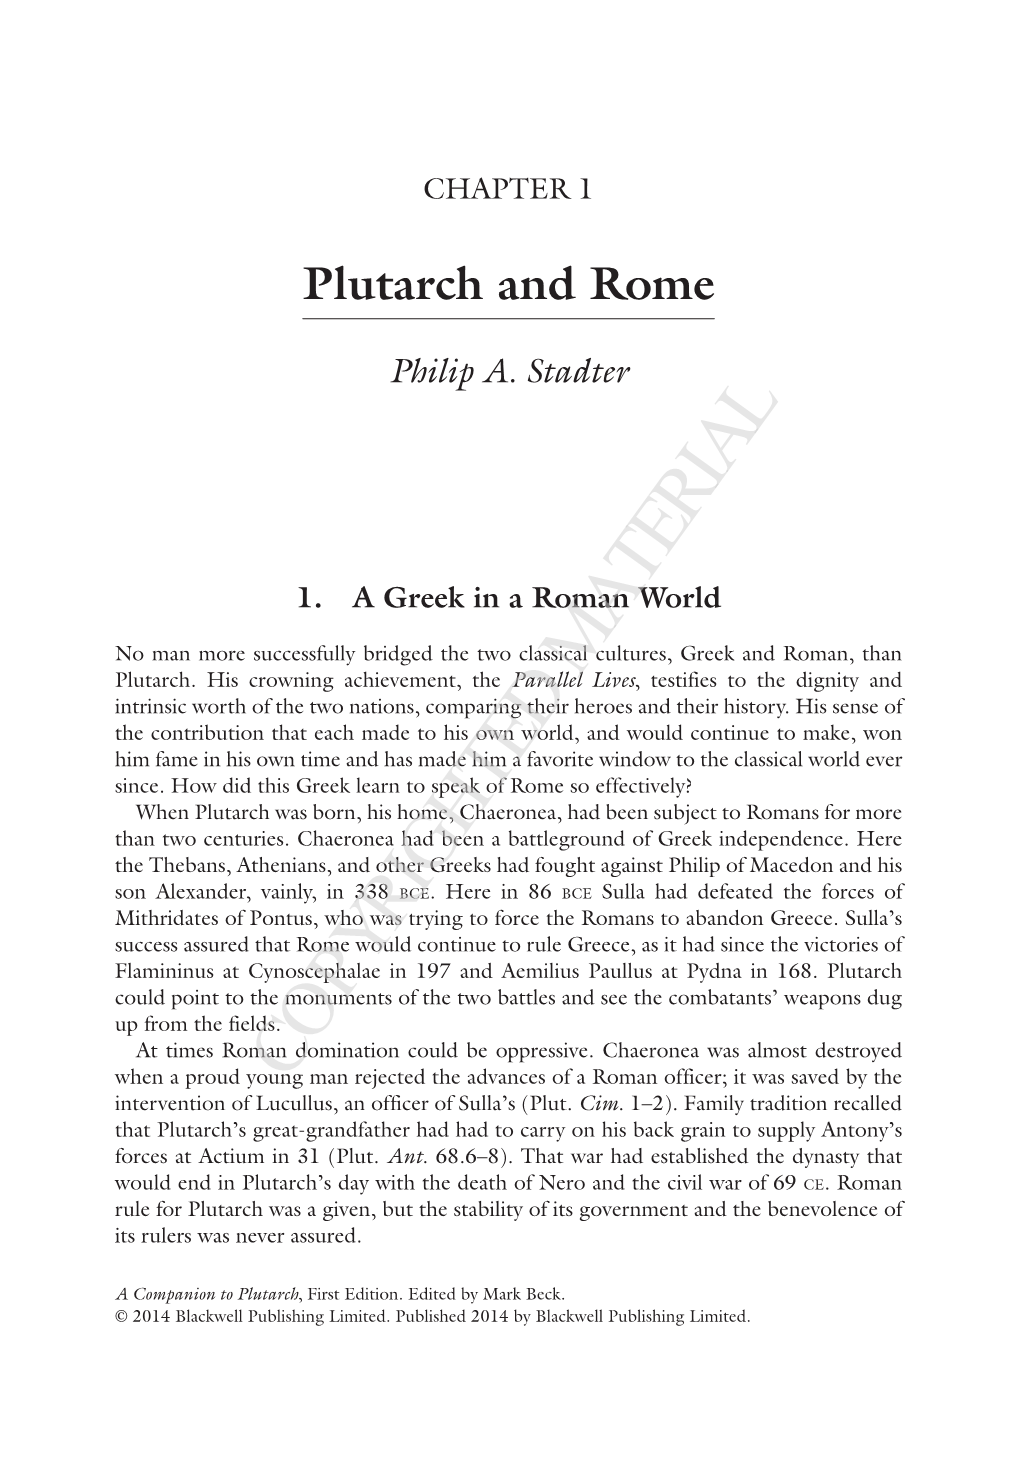 Plutarch and Rome